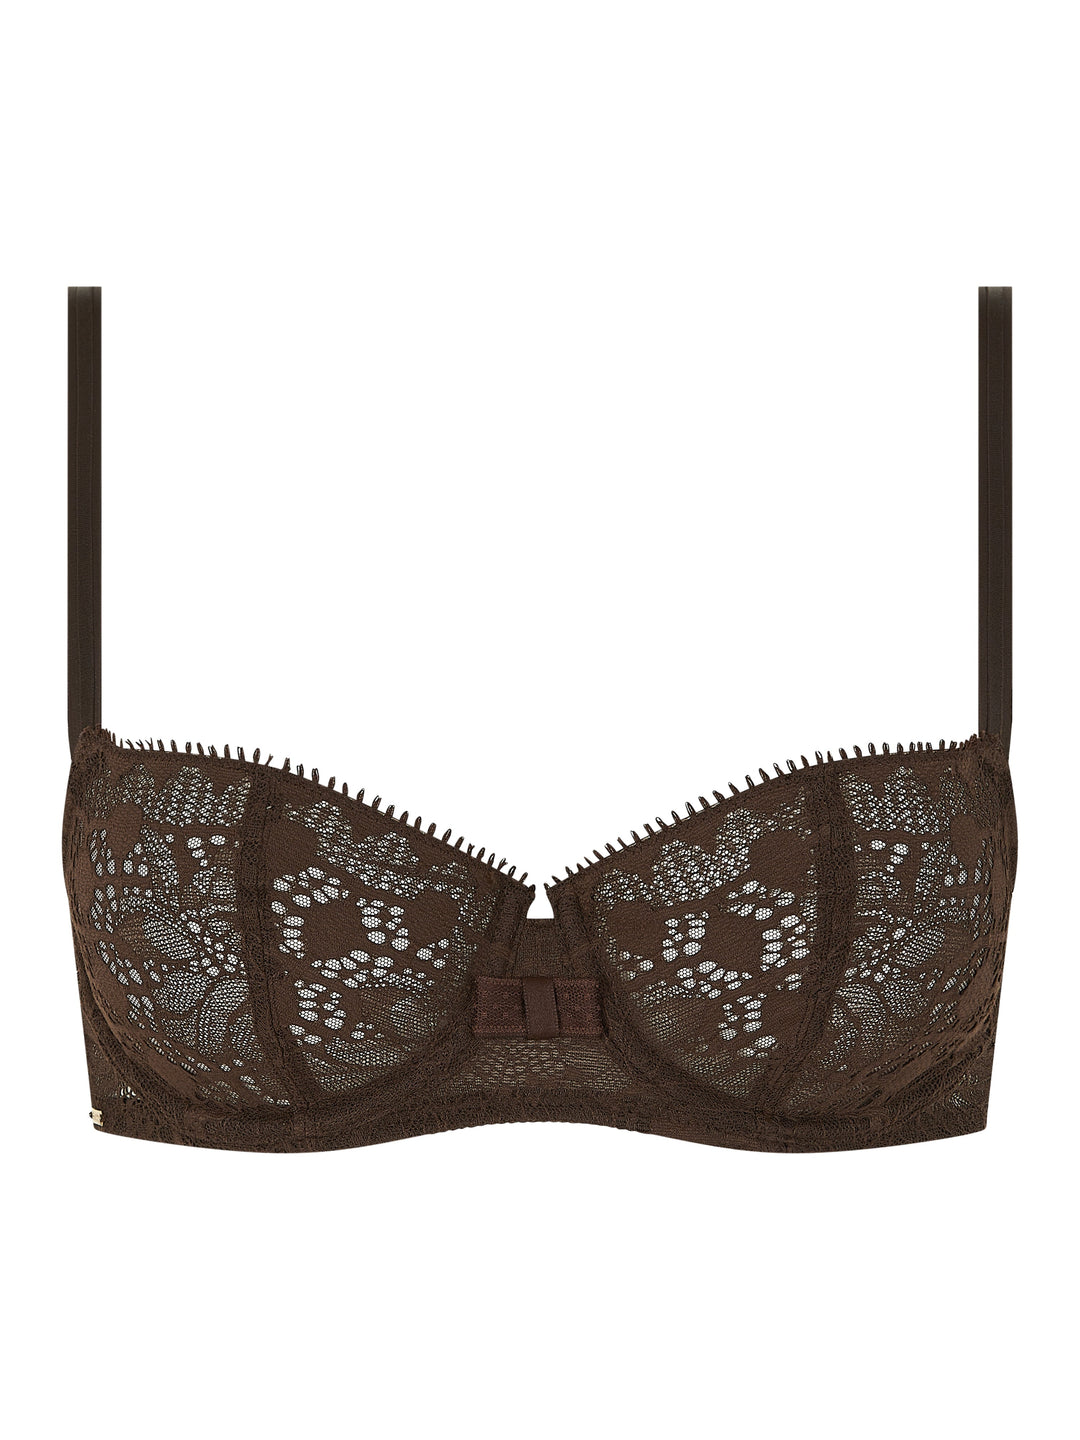 Chantelle - Soutien-gorge corbeille Day To Night Marron Soutien-gorge corbeille Chantelle